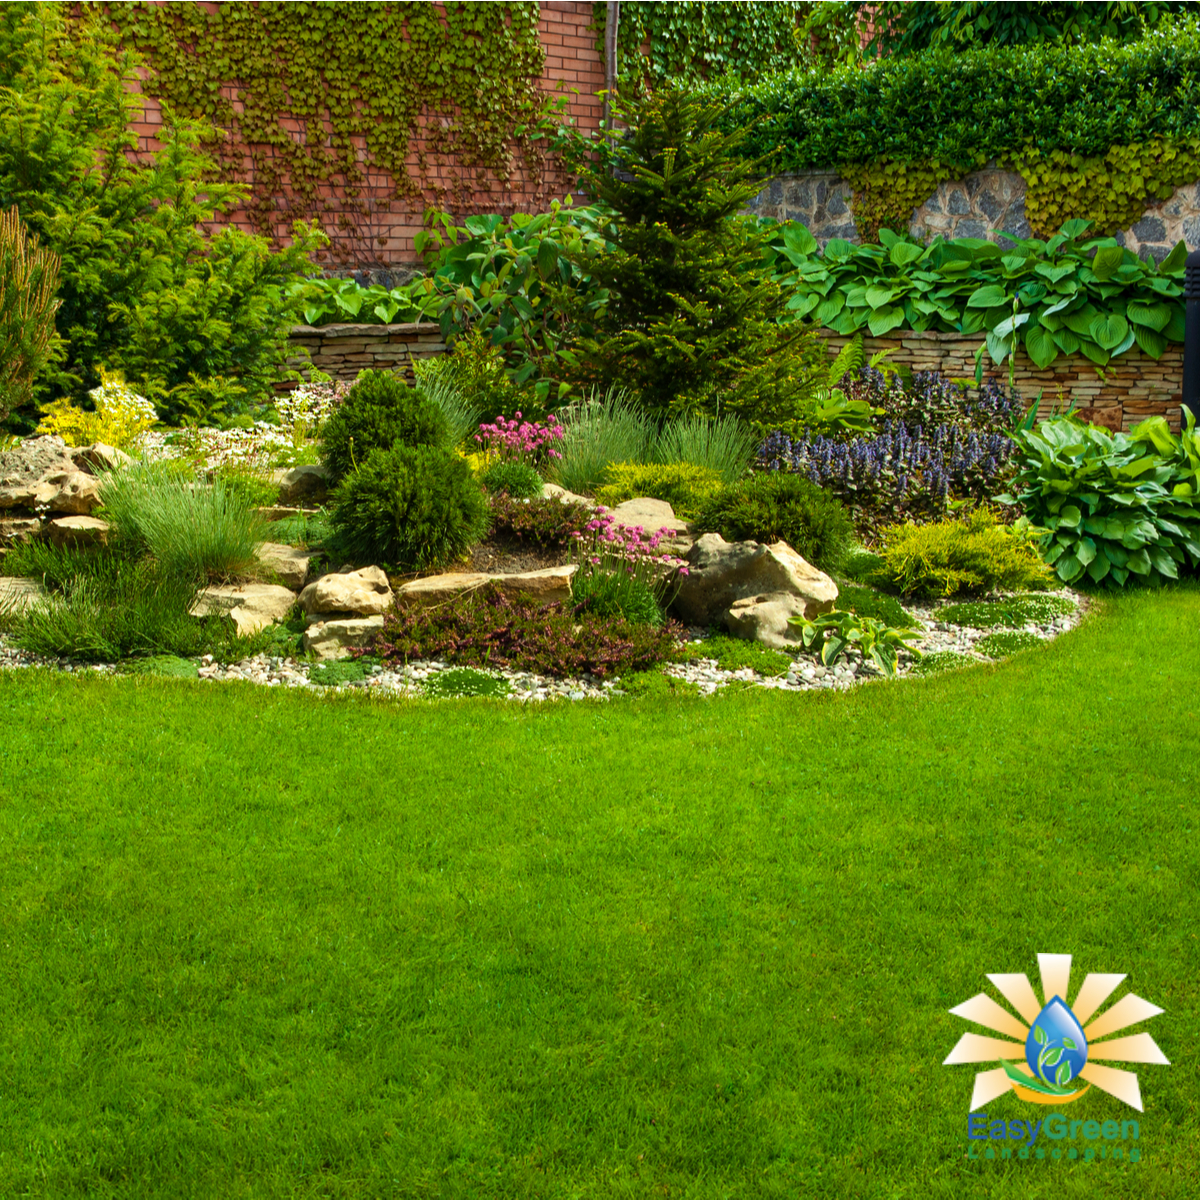 Full Service Landscaping Design For Snohomish Homes And Businesses